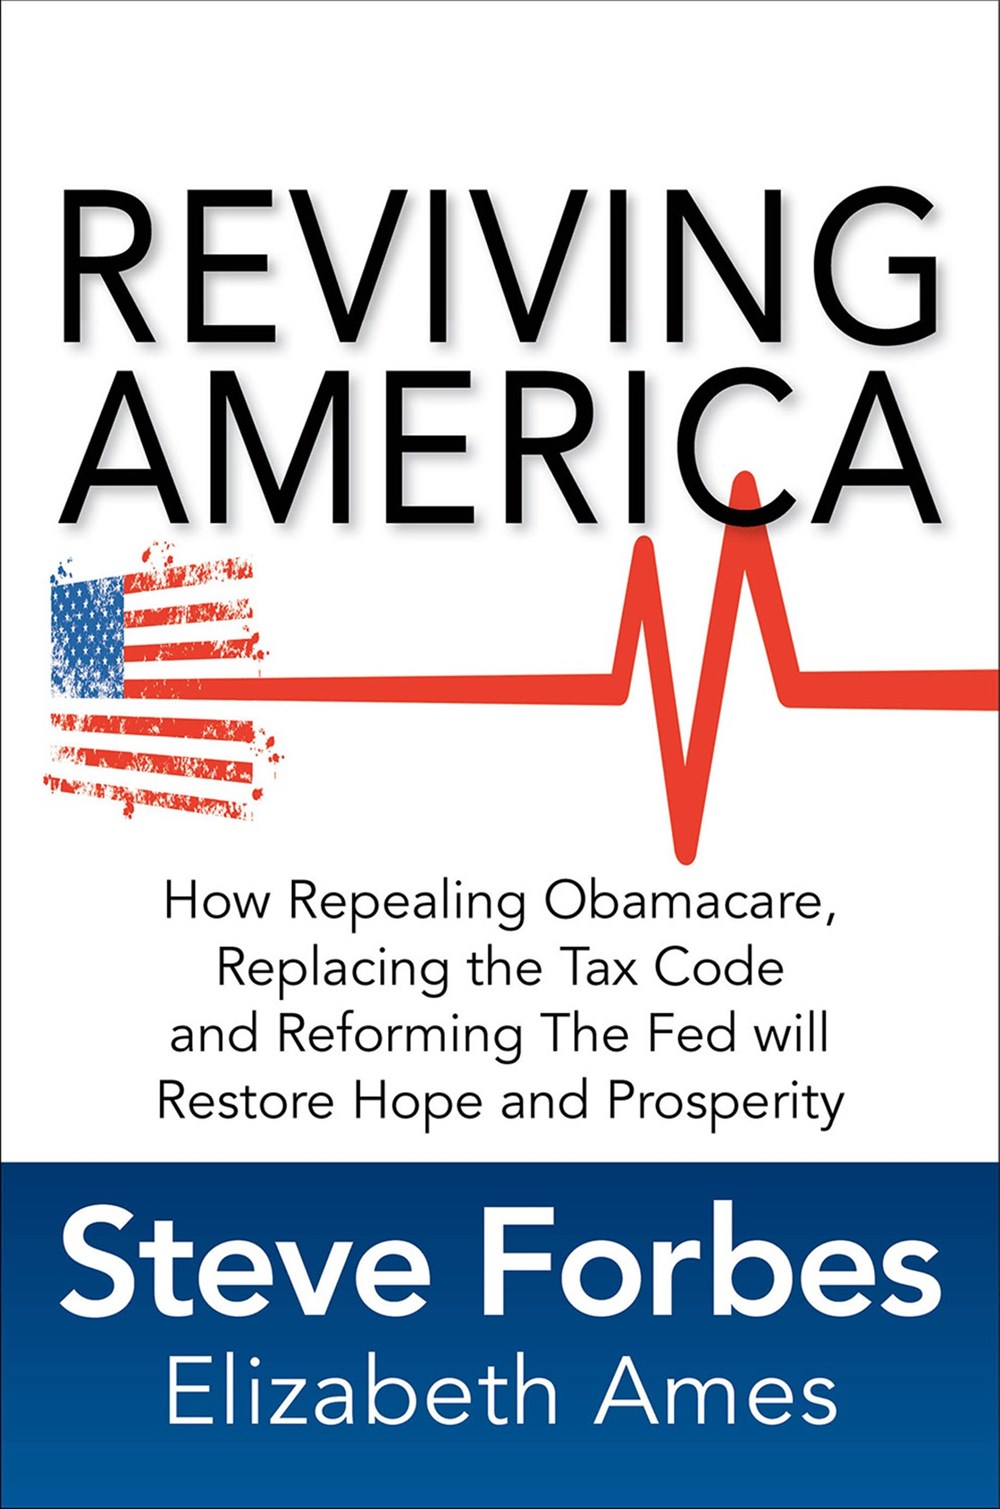 Reviving America: How Repealing Obamacare, Replacing the Tax Code and Reforming the Fed Will Restore